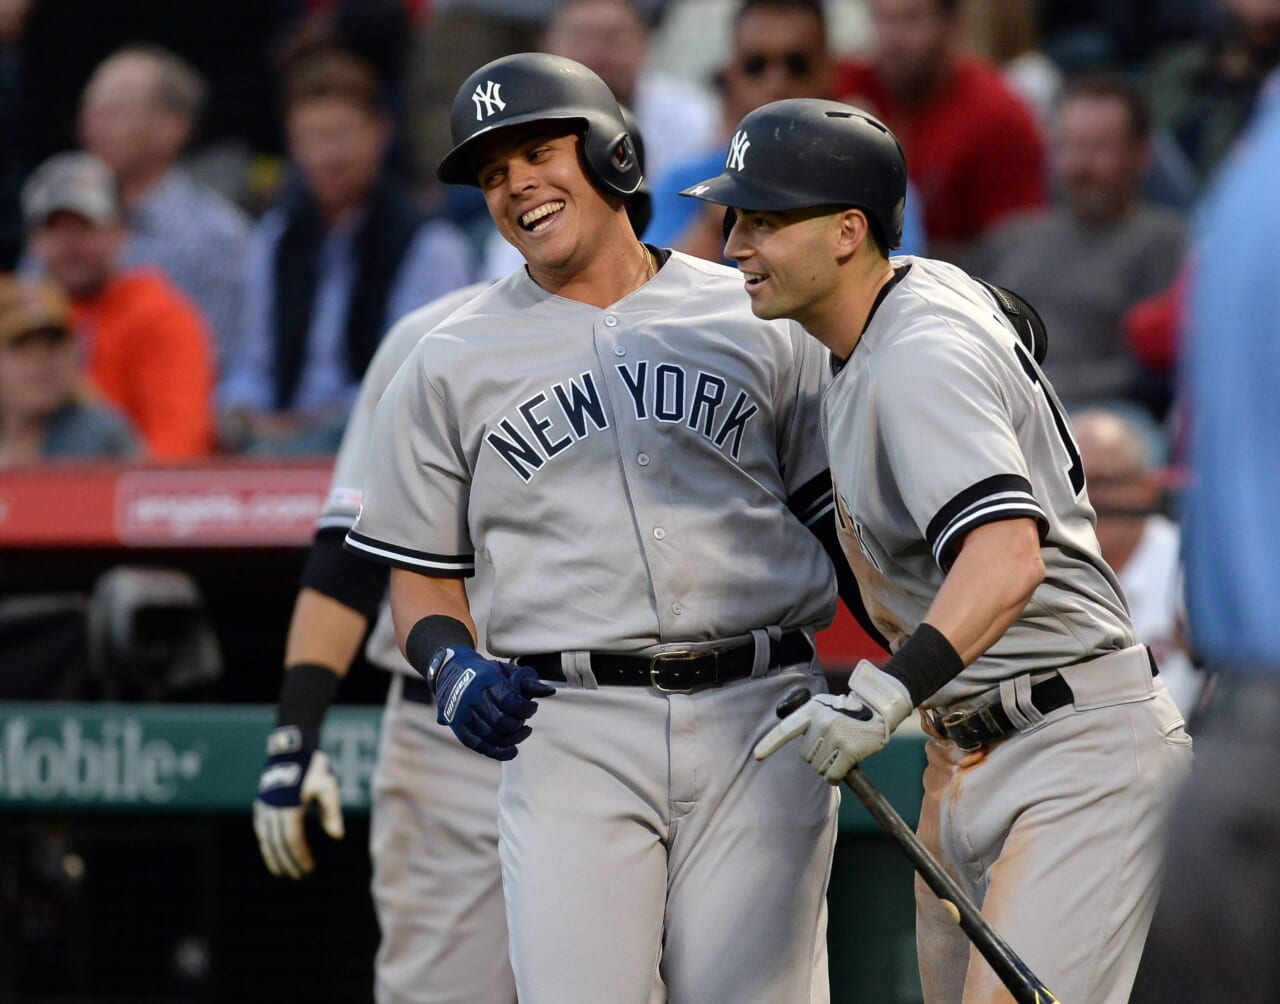 New York Yankees Recaps: Yankees blow out the Blue Jays 12-1 with small ball